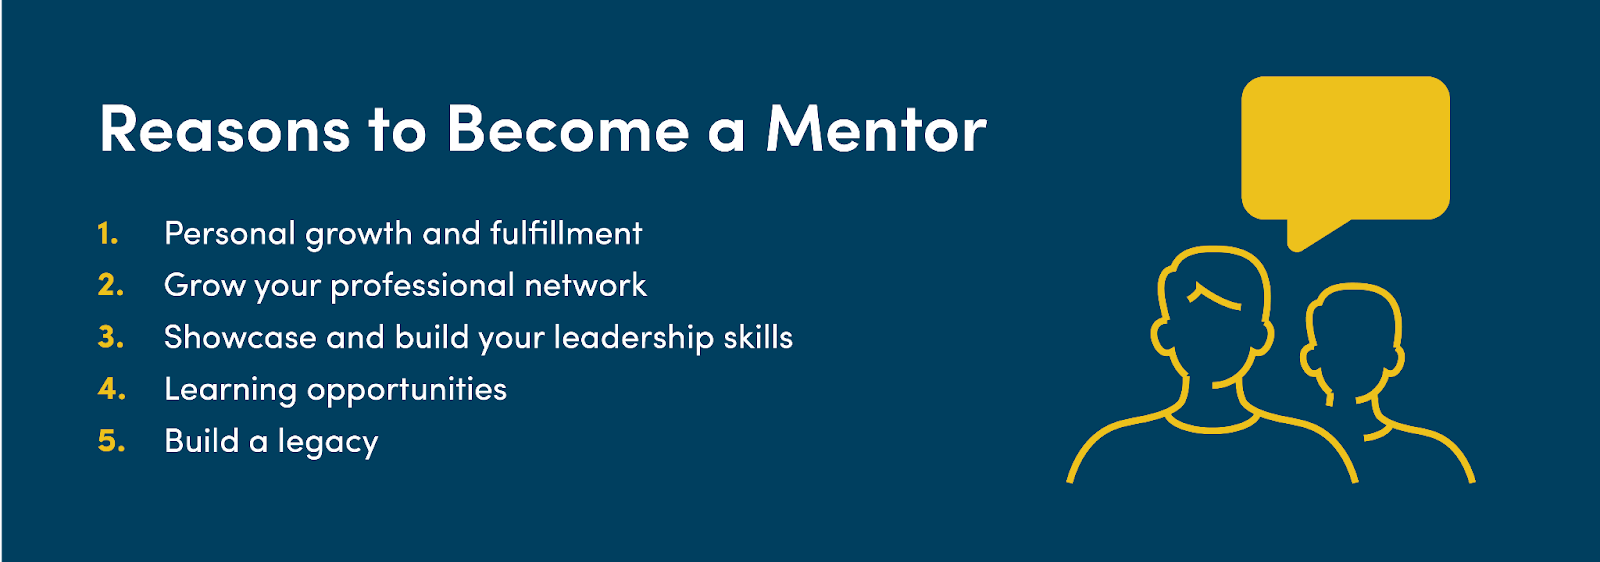 Reasons to become a mentor